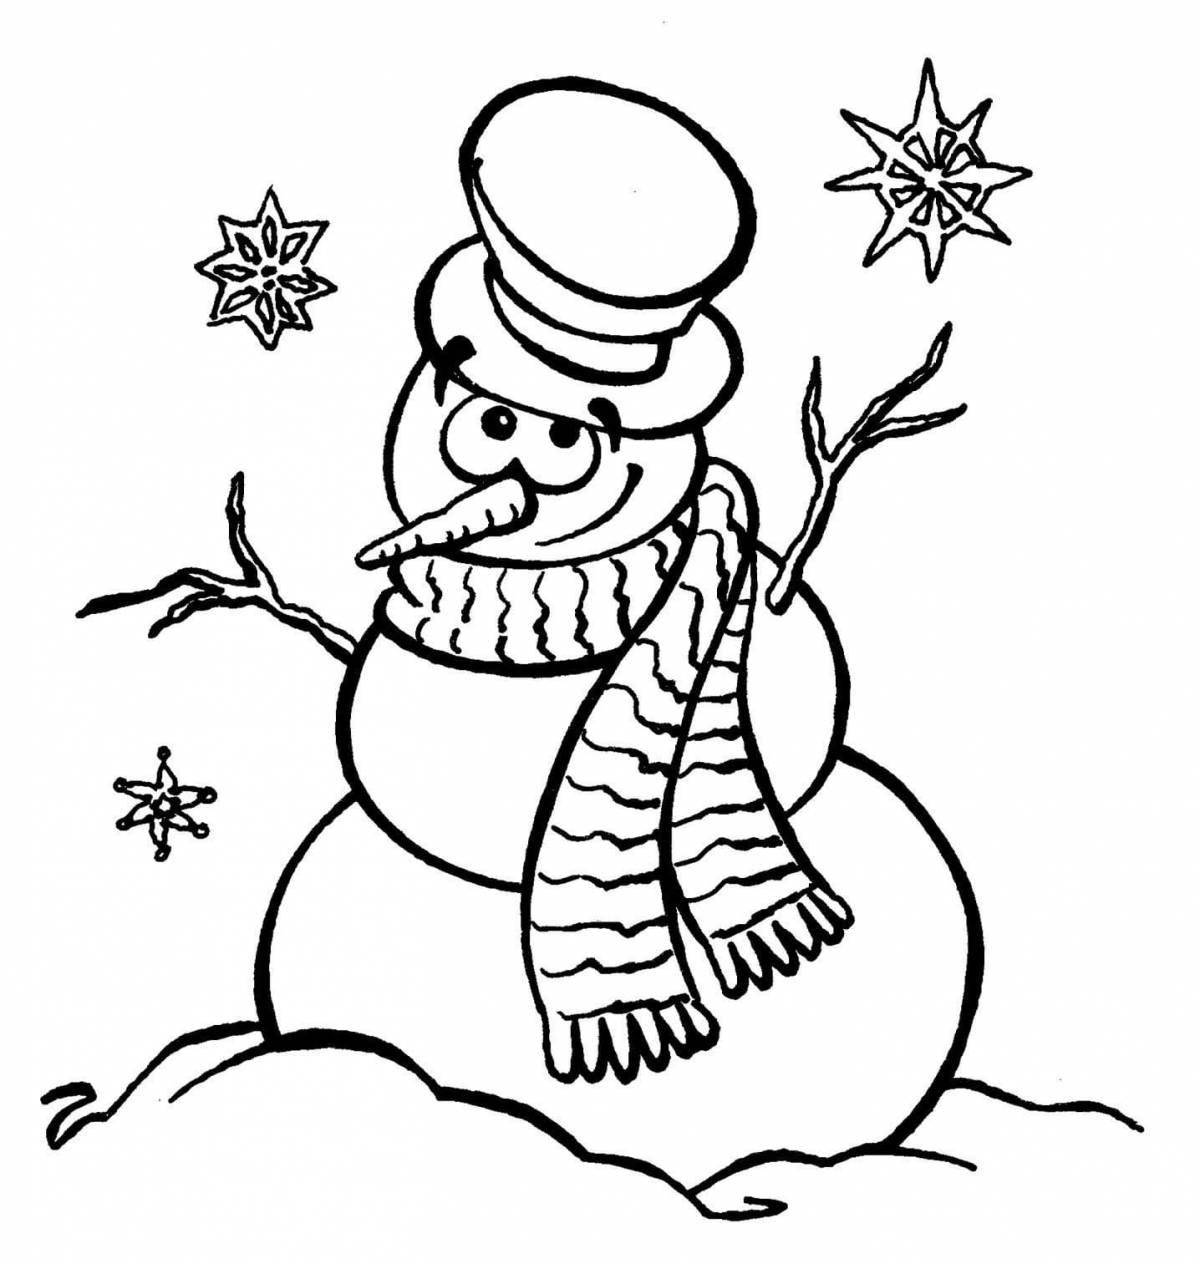 Magic snowman coloring book for children 2-3 years old